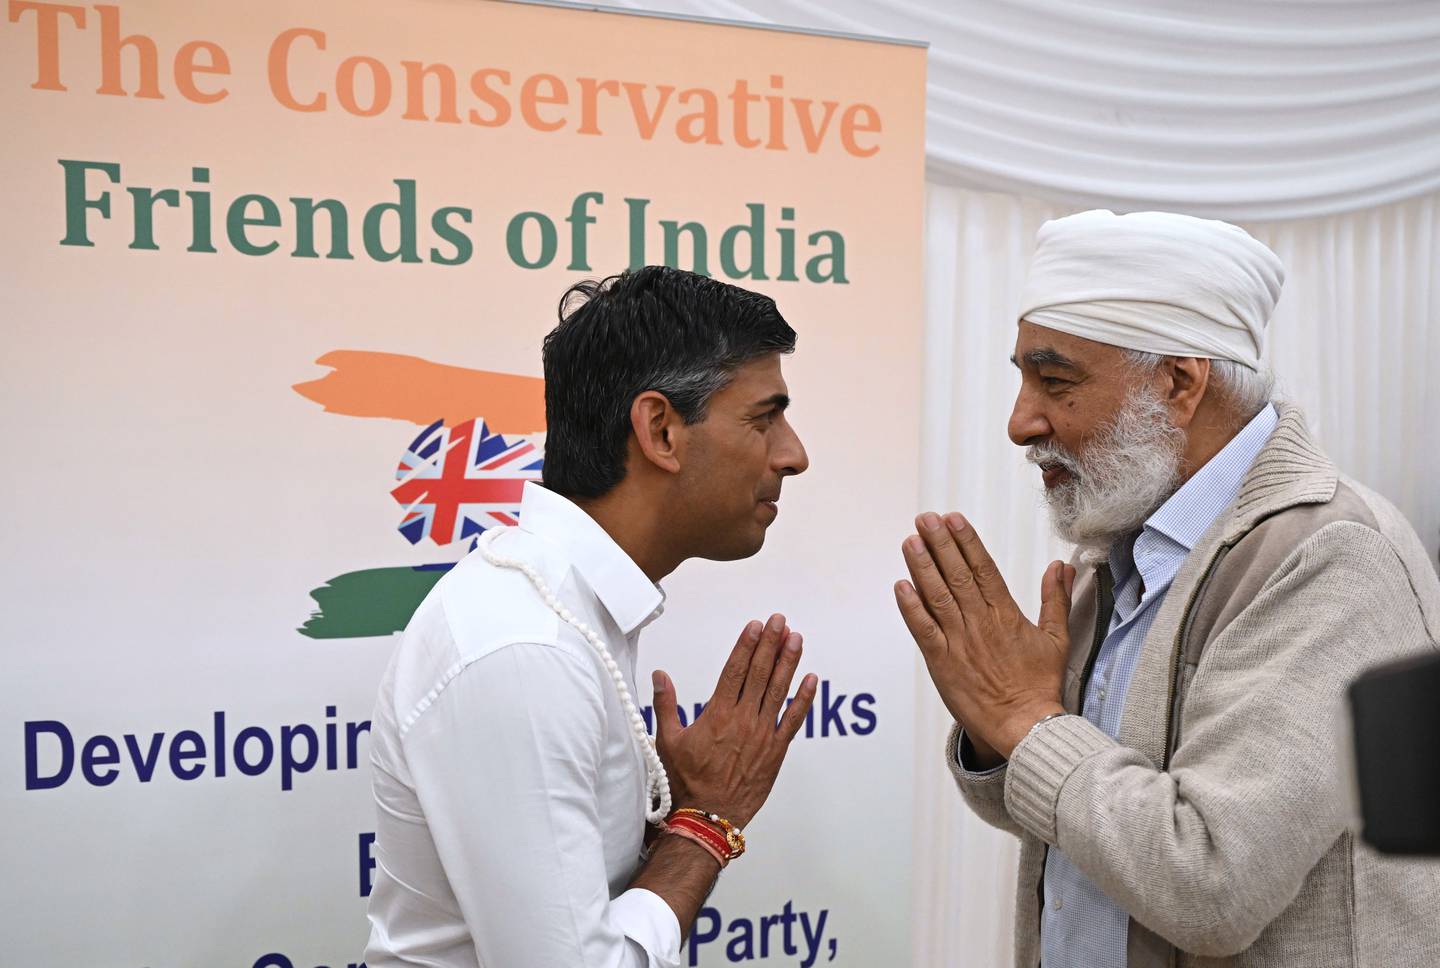 Rishi Sunak at an event in north London organised by the Conservative Friends of India. PA

